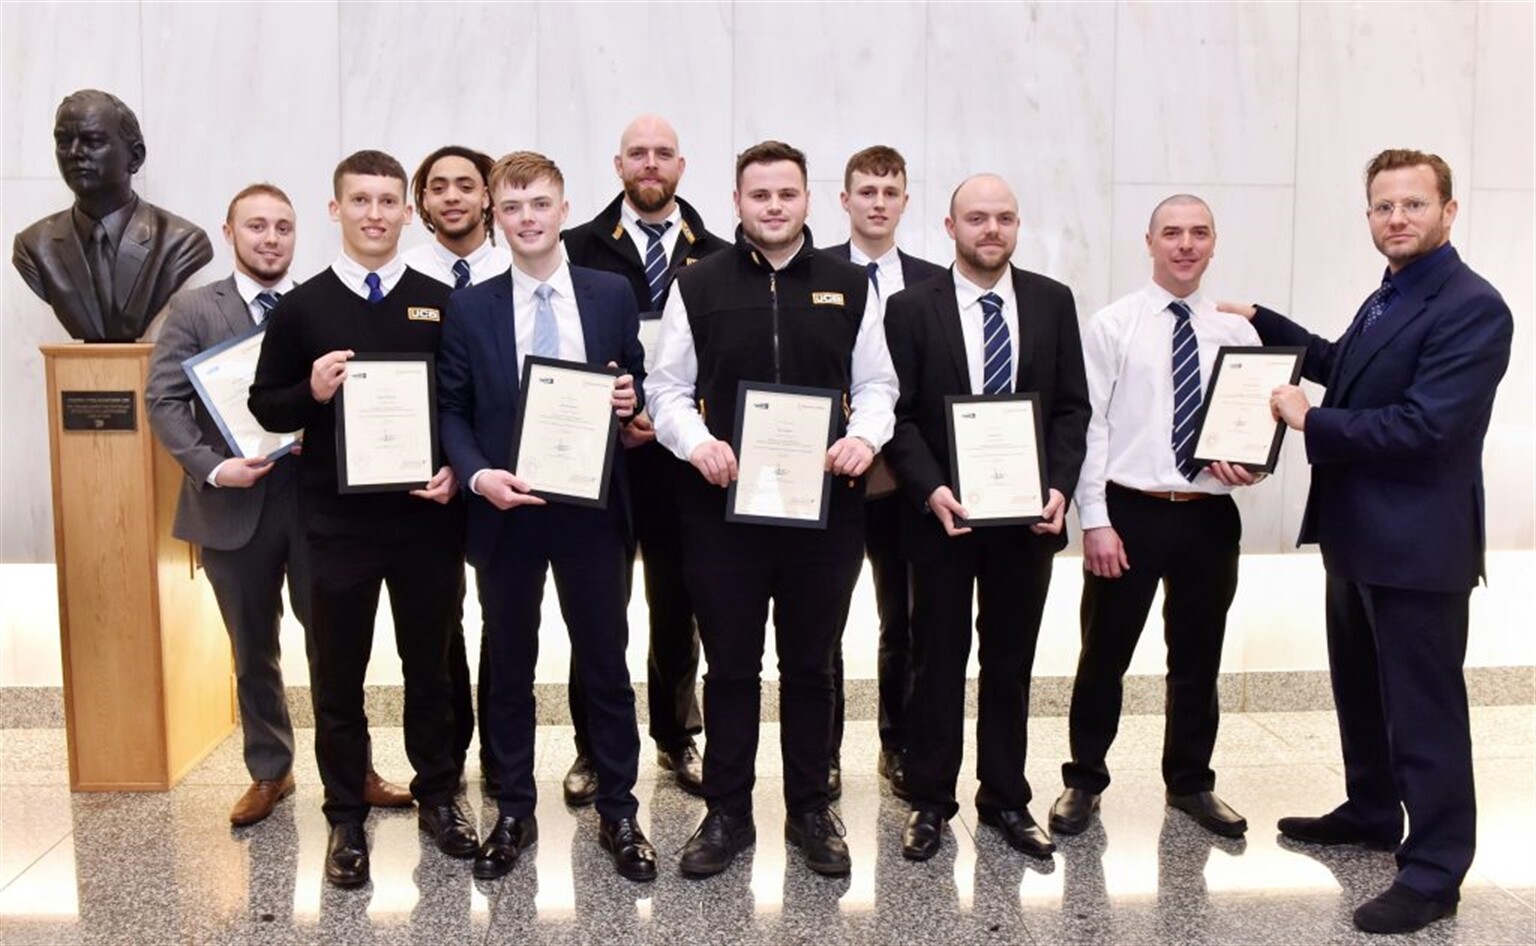 JCB CELEBRATES RECORD NUMBER OF CONTRACTS FOR APPRENTICES